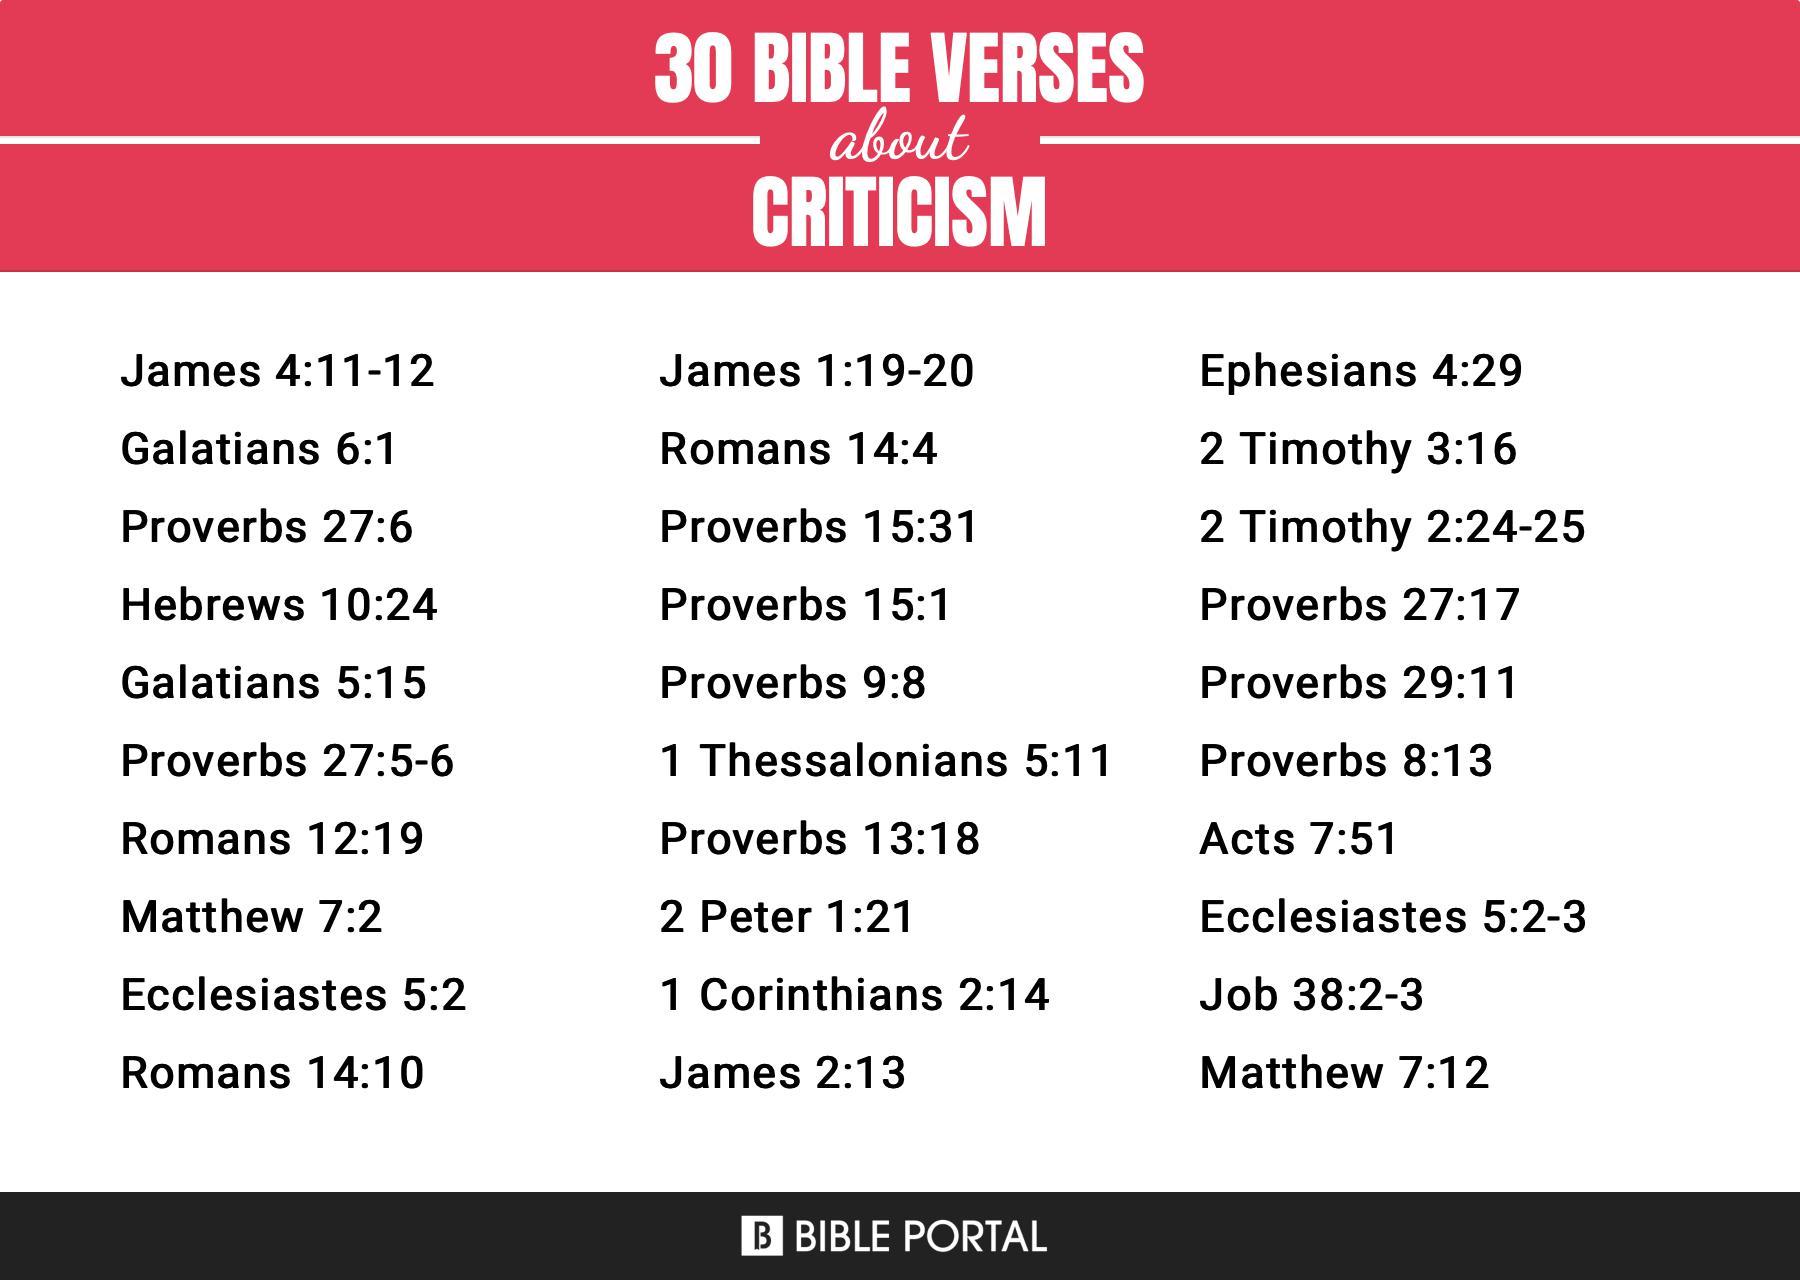 What Does the Bible Say about Criticism?